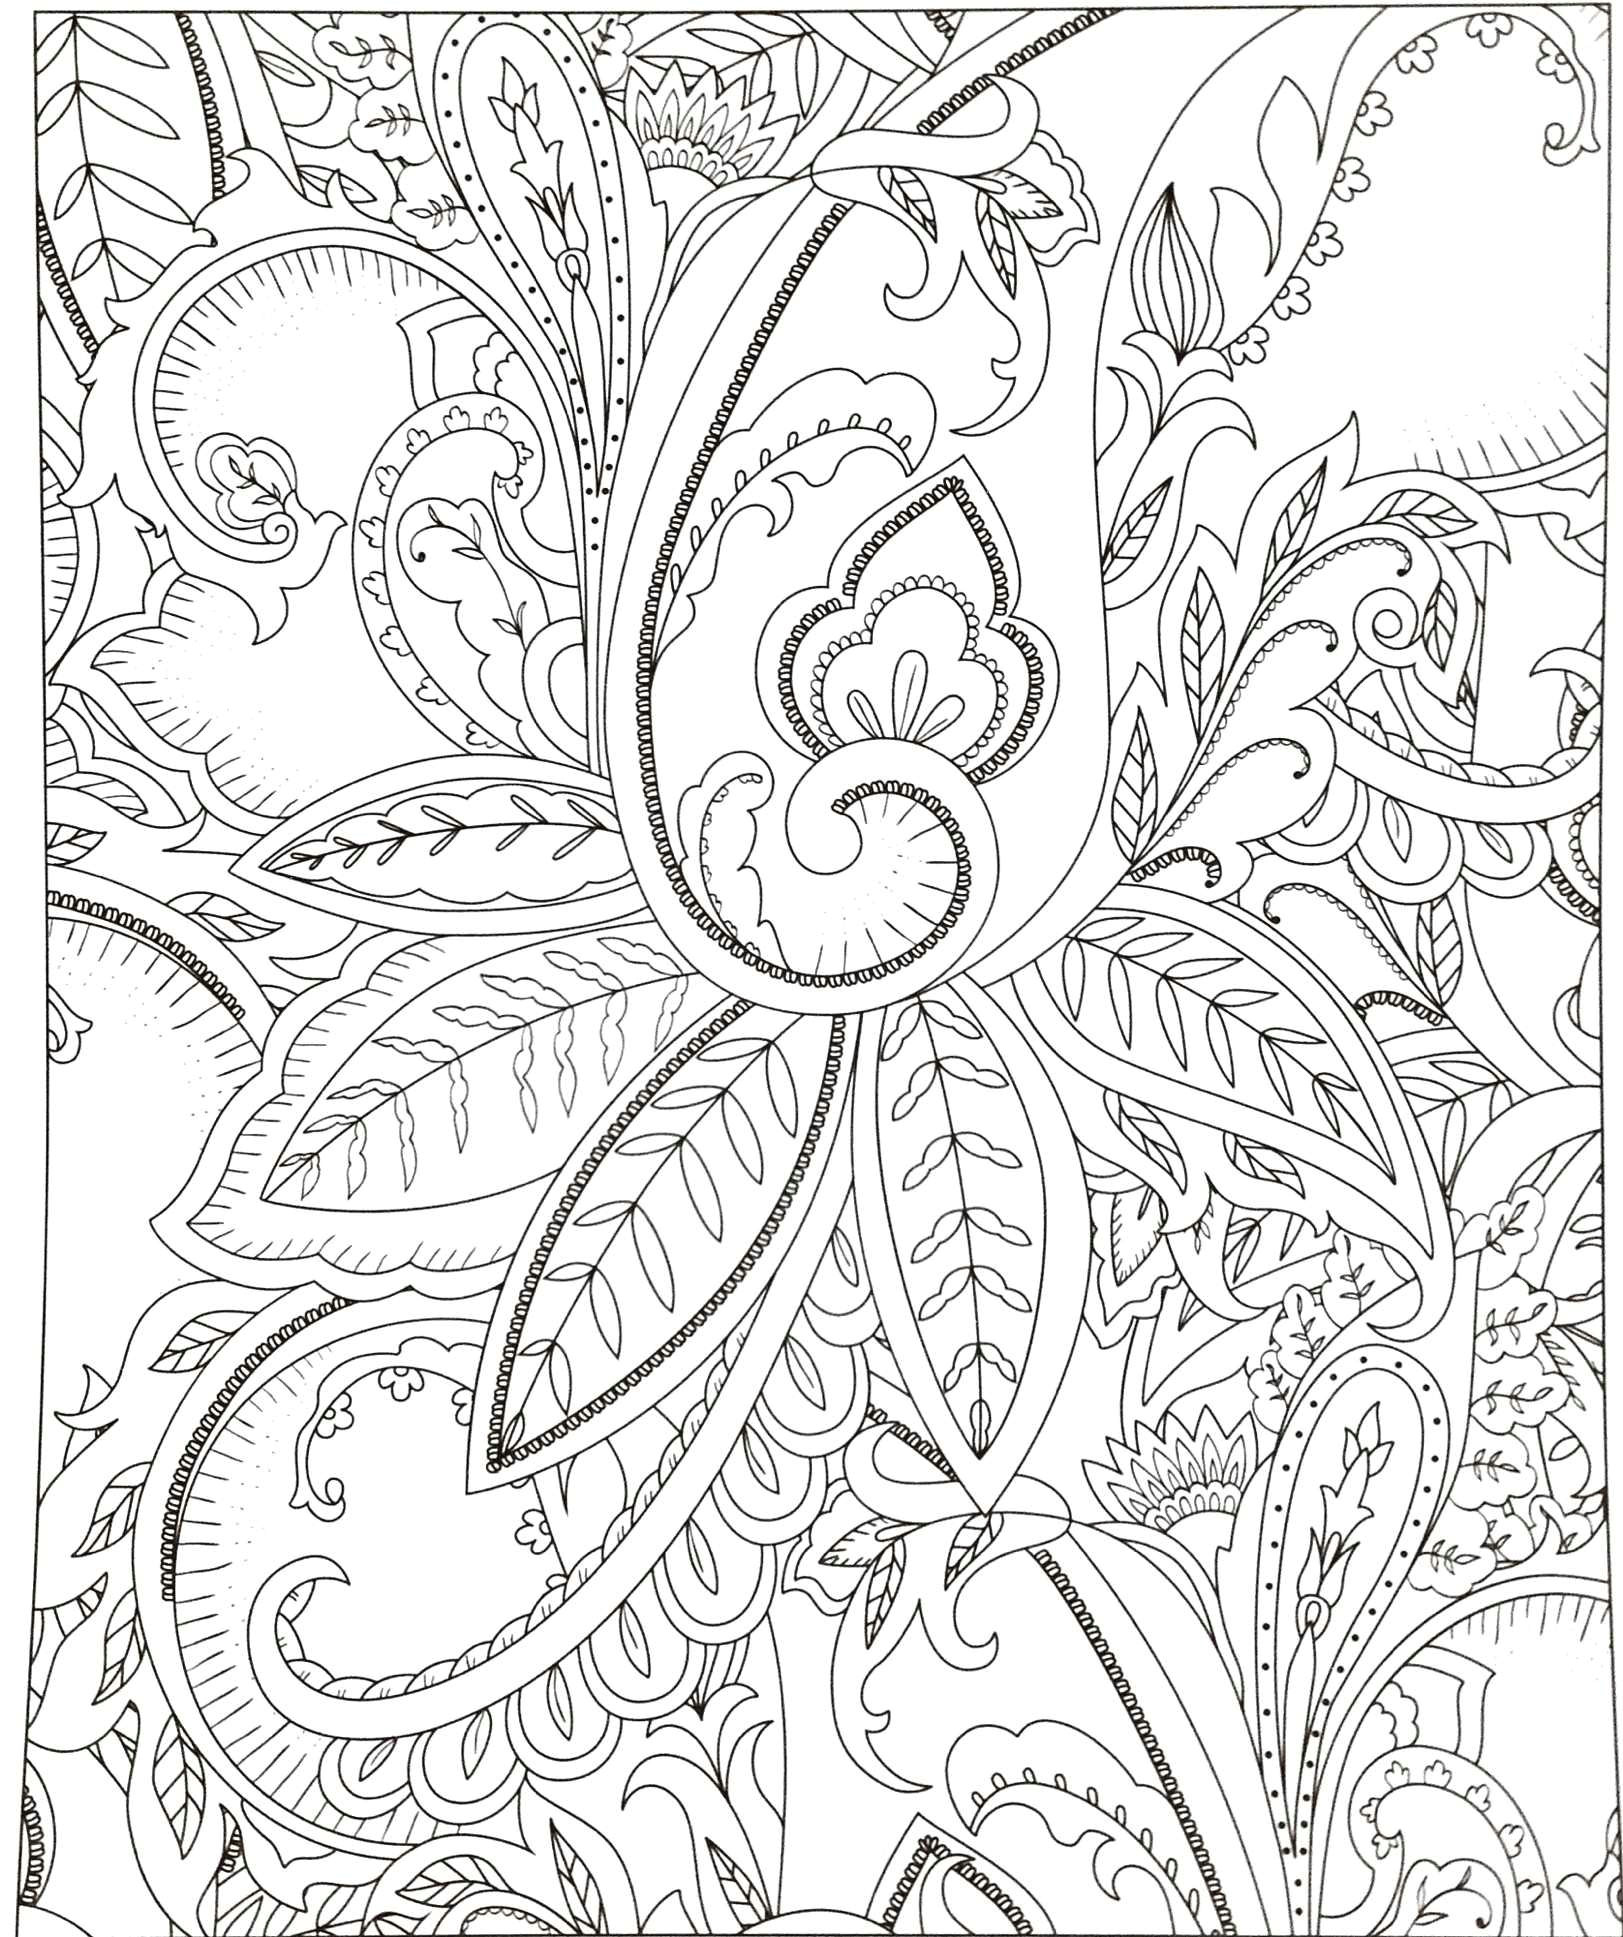 easy to draw instruments home coloring pages best color sheet 0d modokom fun time